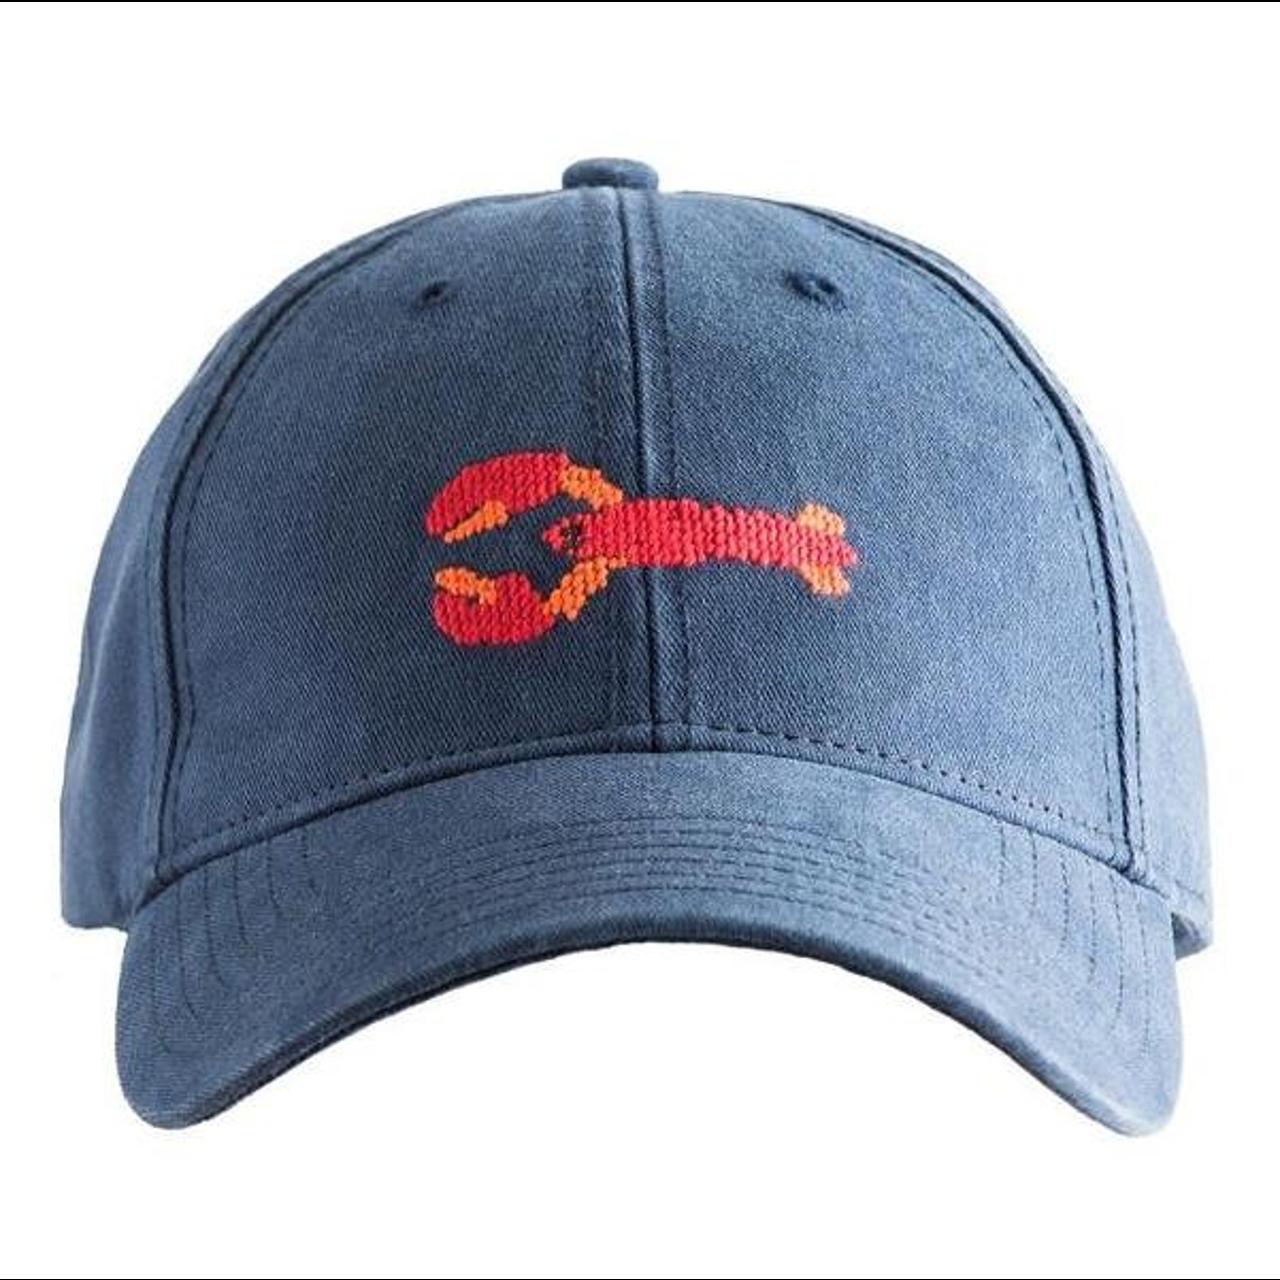 Lilly Pulitzer Women's Navy and Red Hat